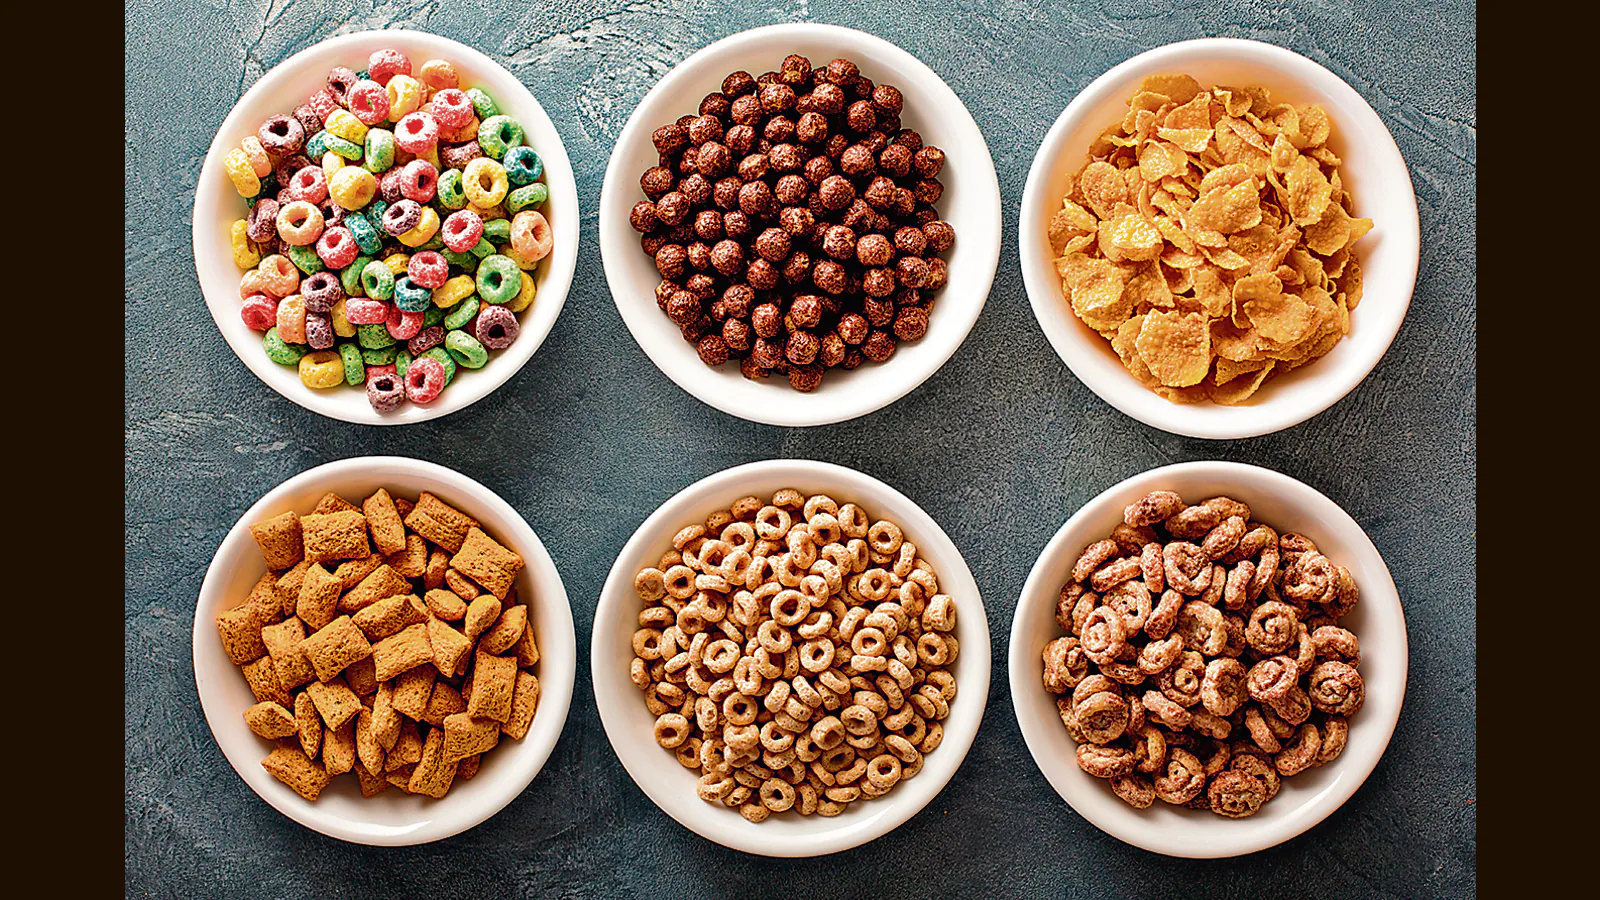 Inside the mind of the cereal filler: Swetha Sivakumar on breakfasts